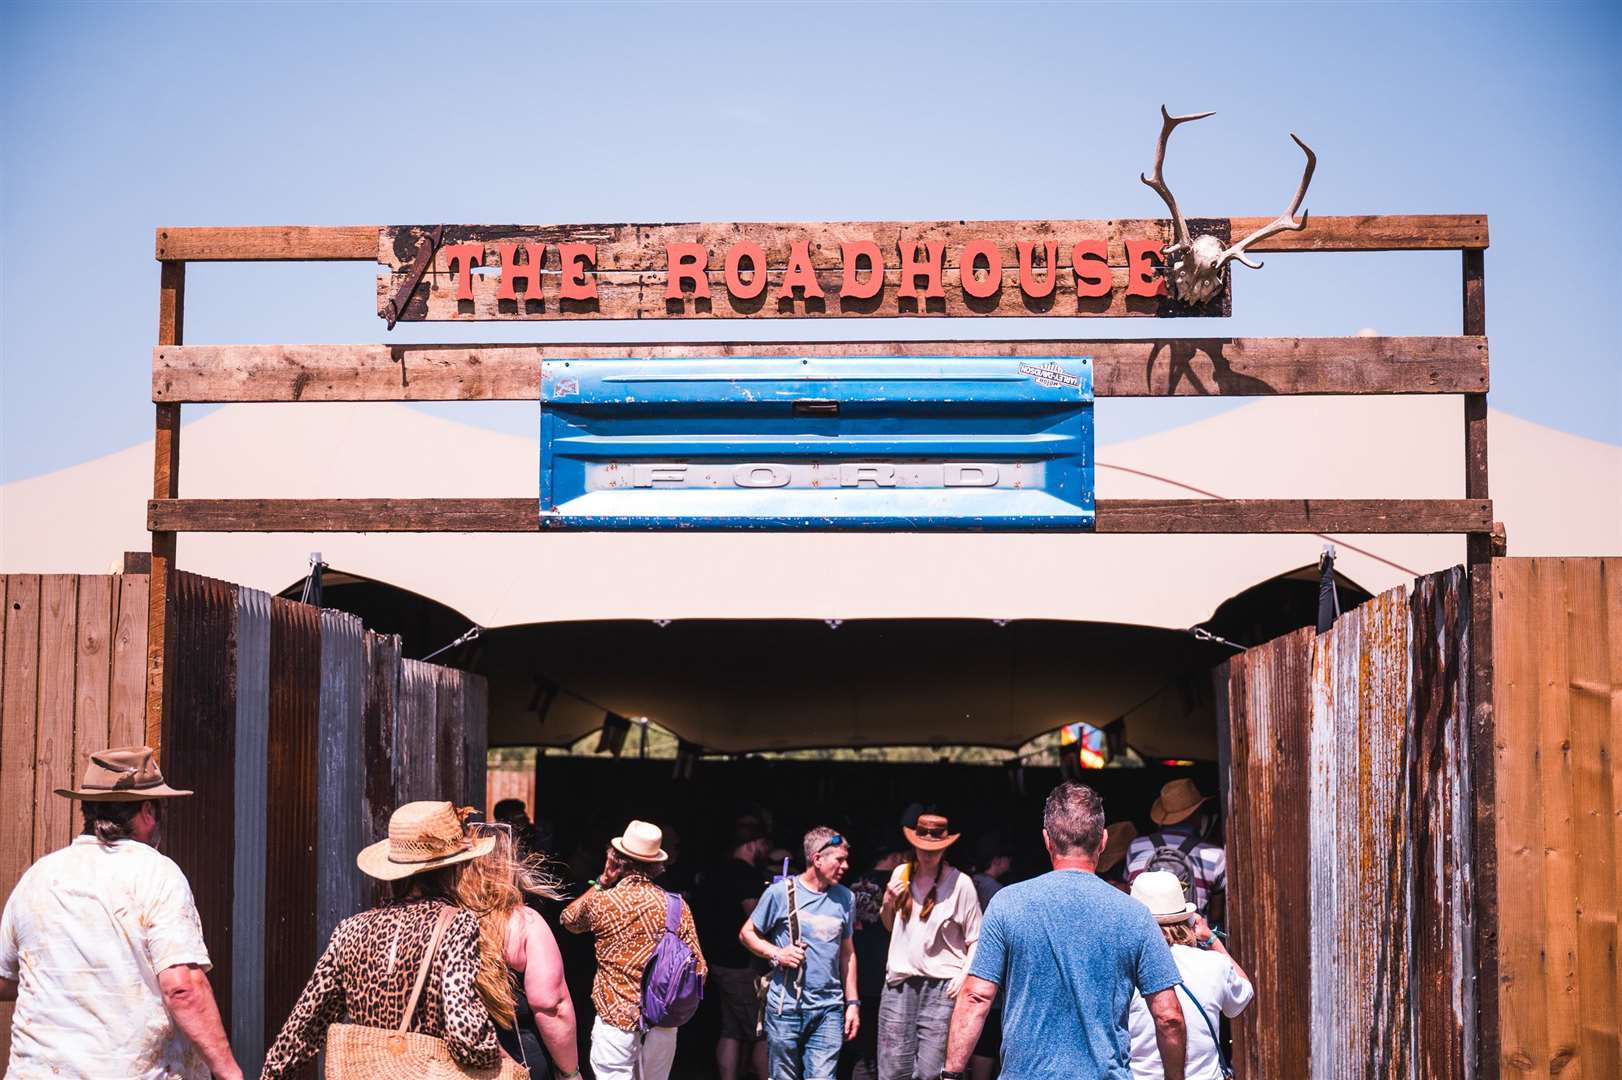 The Roadhouse tent had performances from Eddy Smith & The 507 and Franky Perez. Picture: Caitlin Mogridge